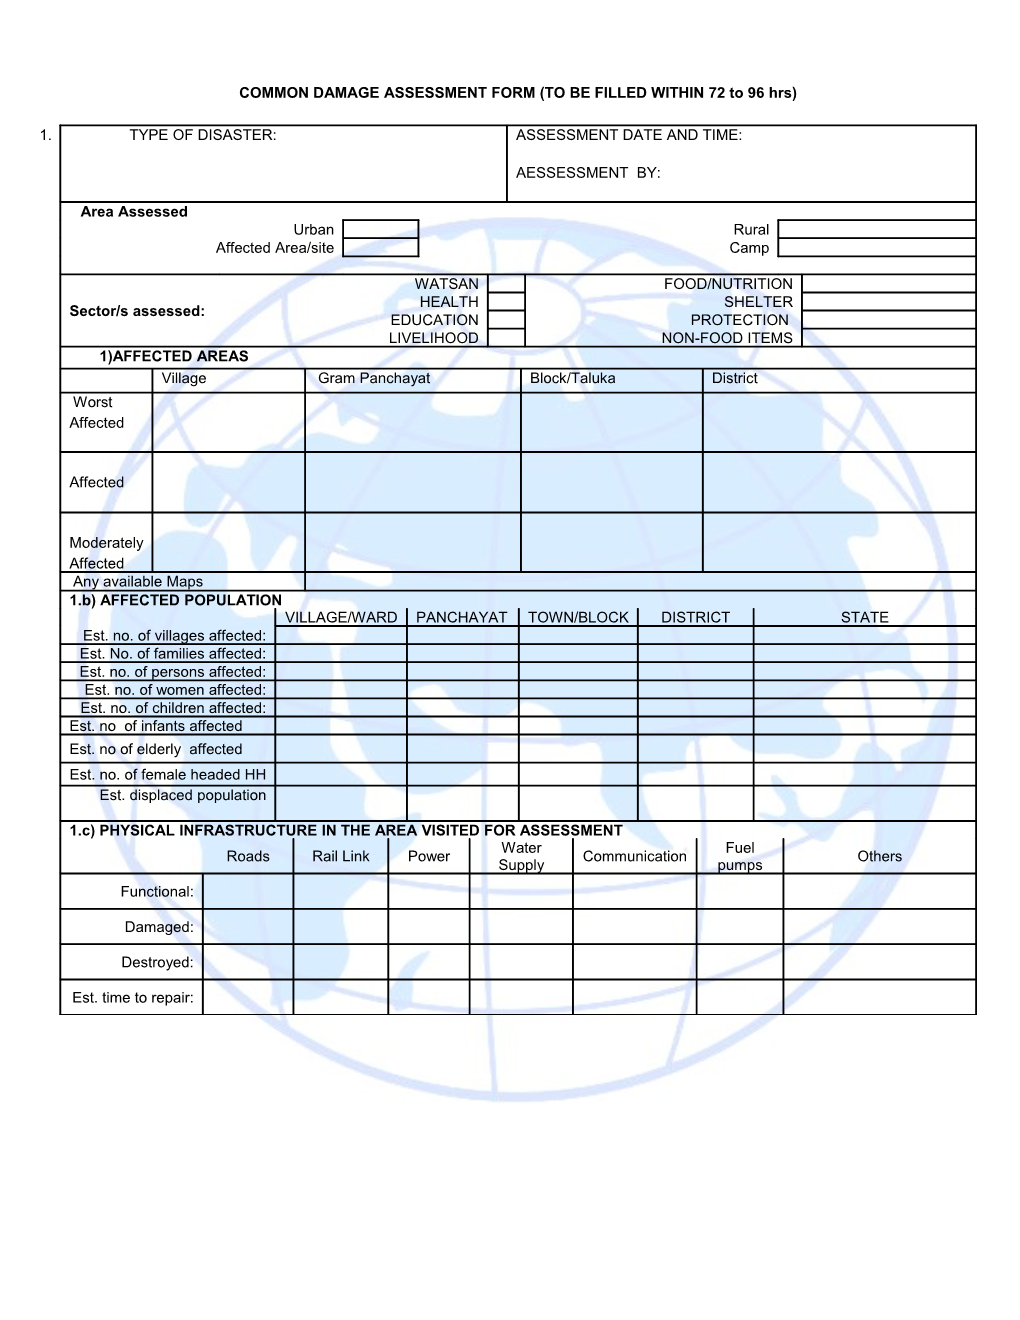 Review of CRS Emergency Assessment Manual Sample Initial Assessment Form